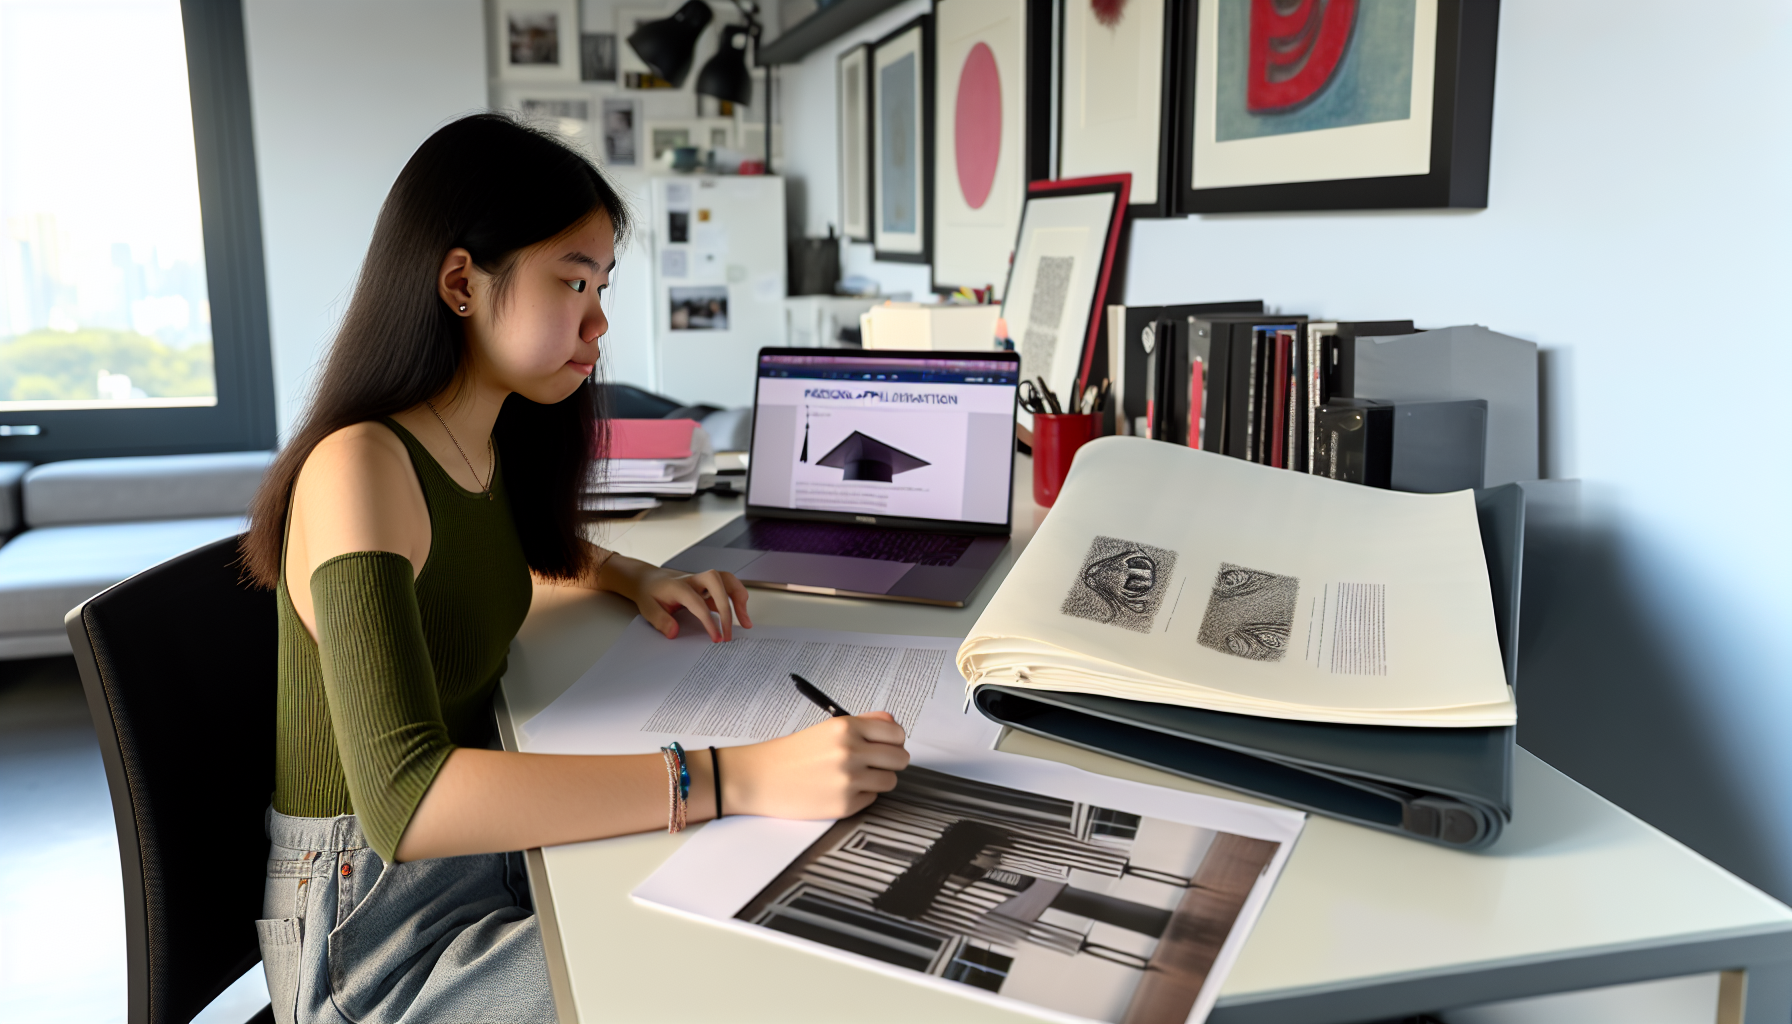 Application process at Parsons School of Design